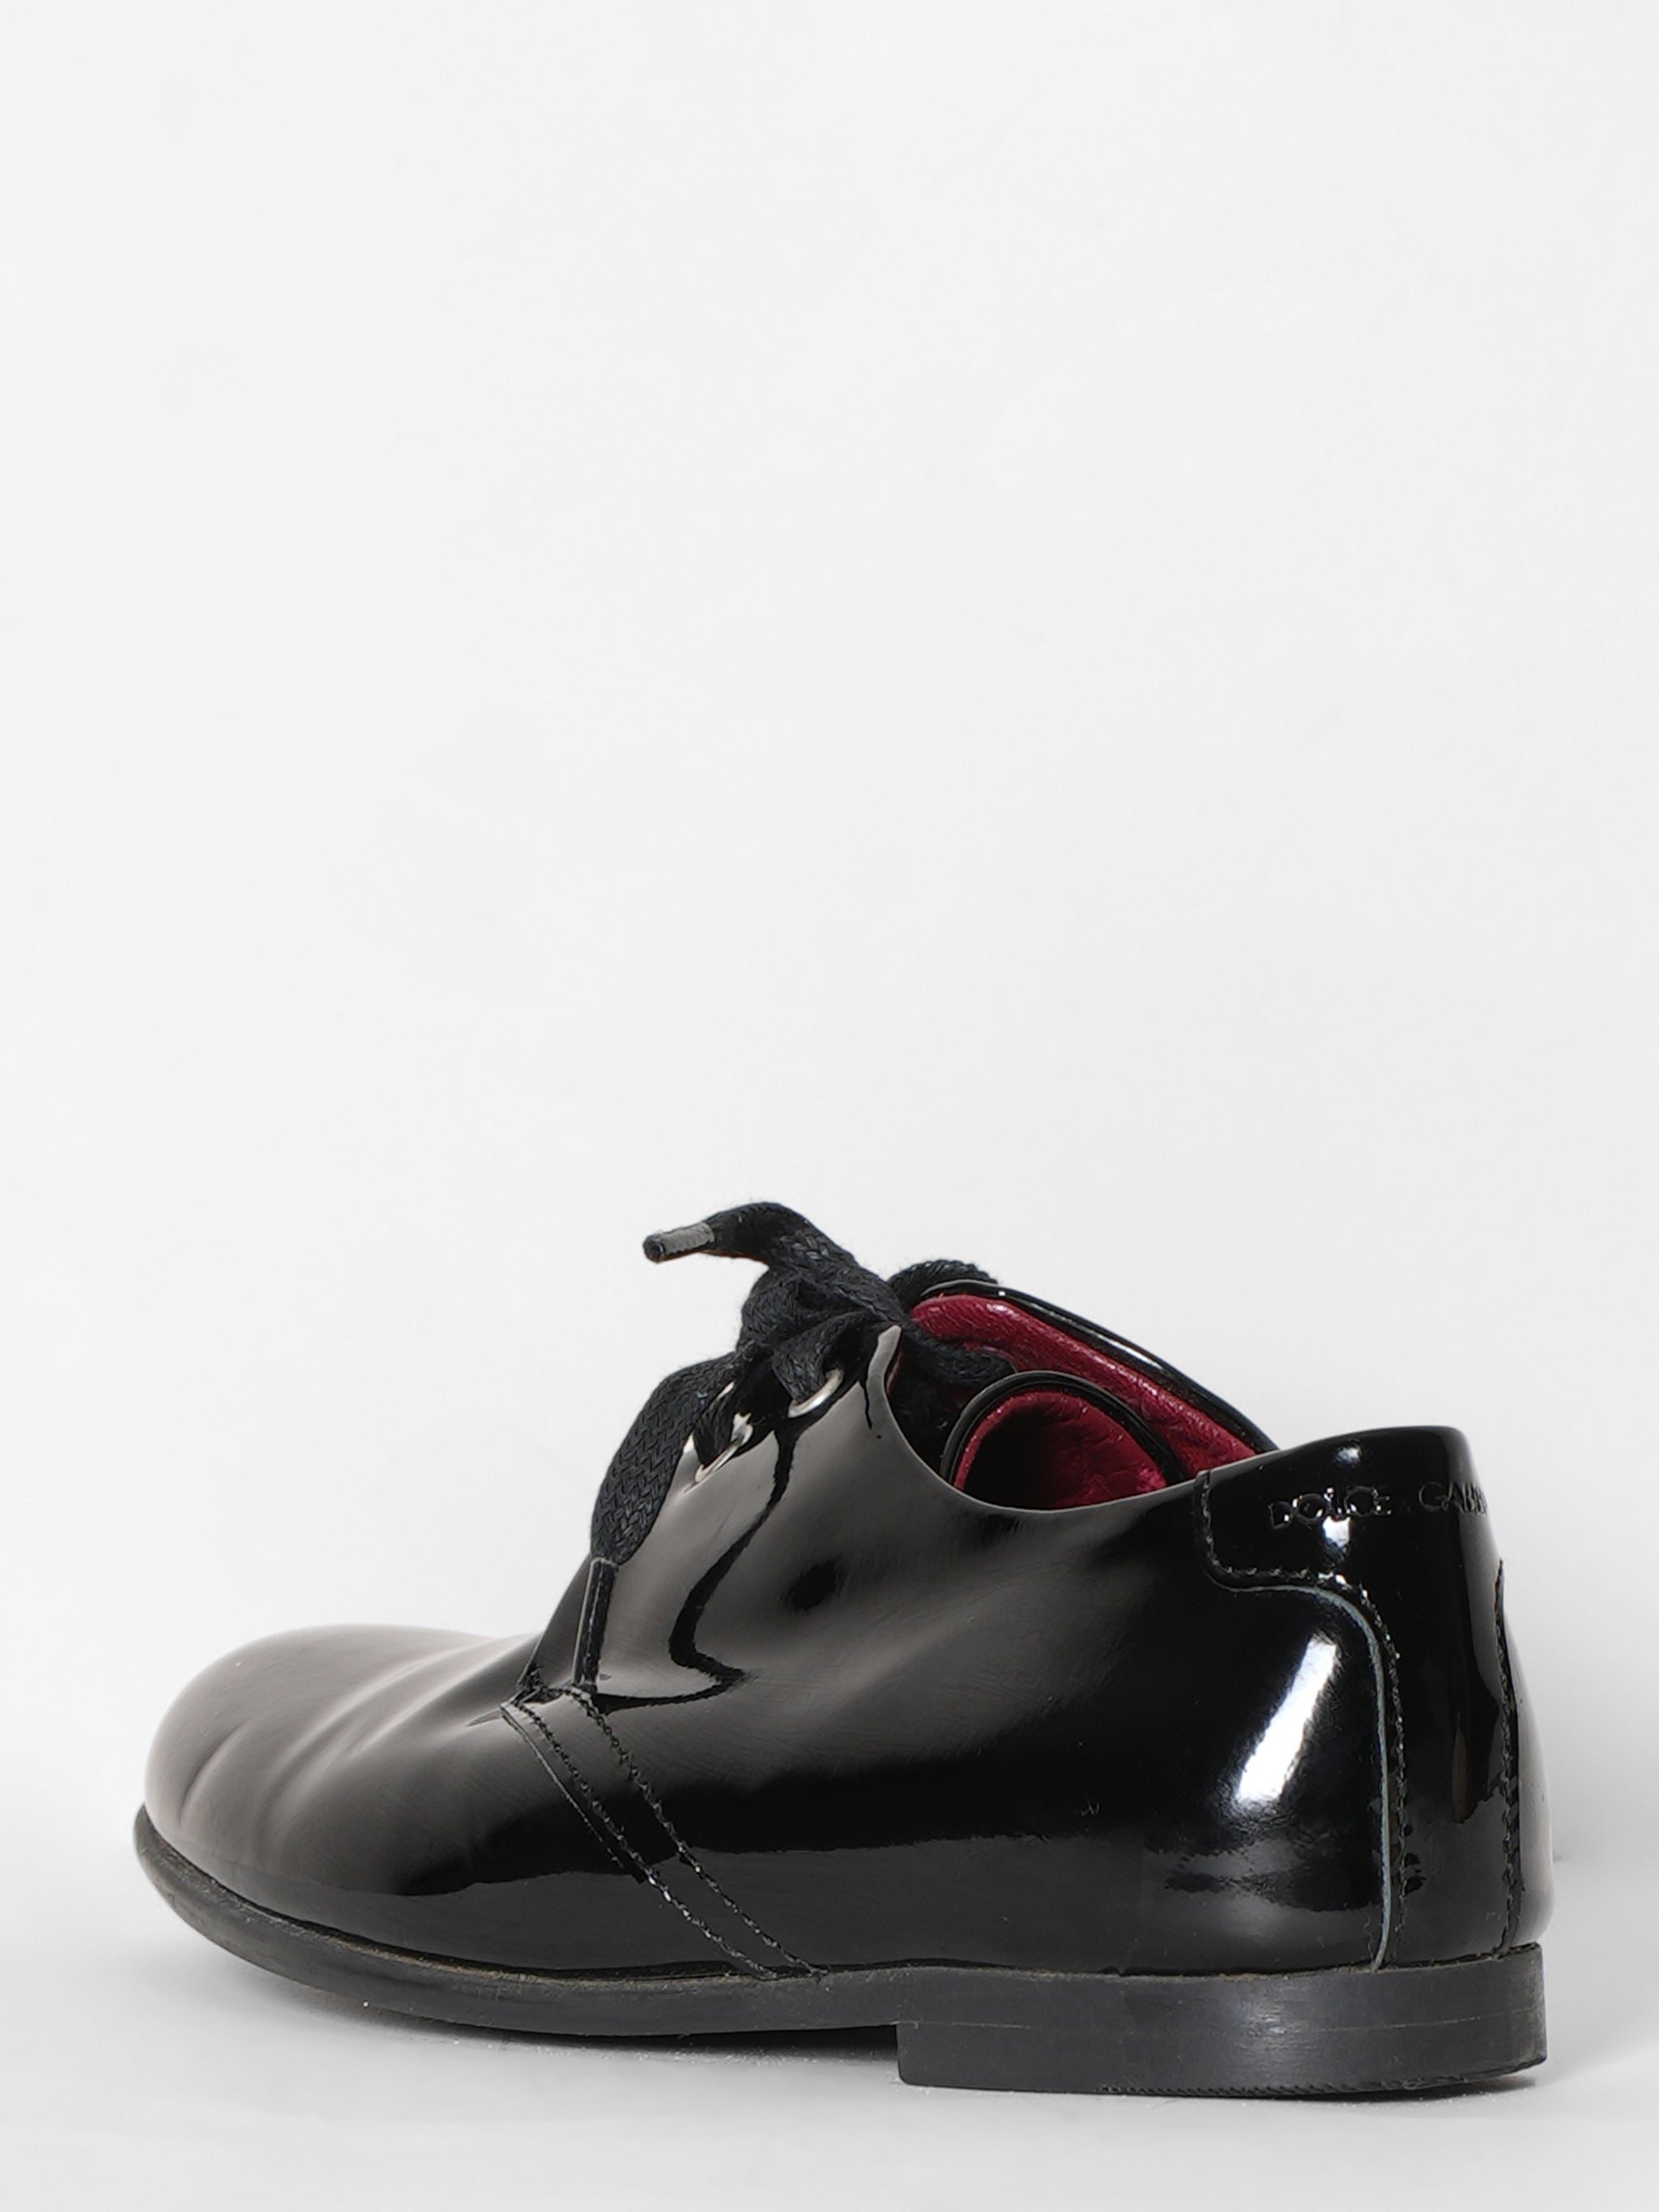 Dolce & Gabbana Pointed Black Toe Shoes